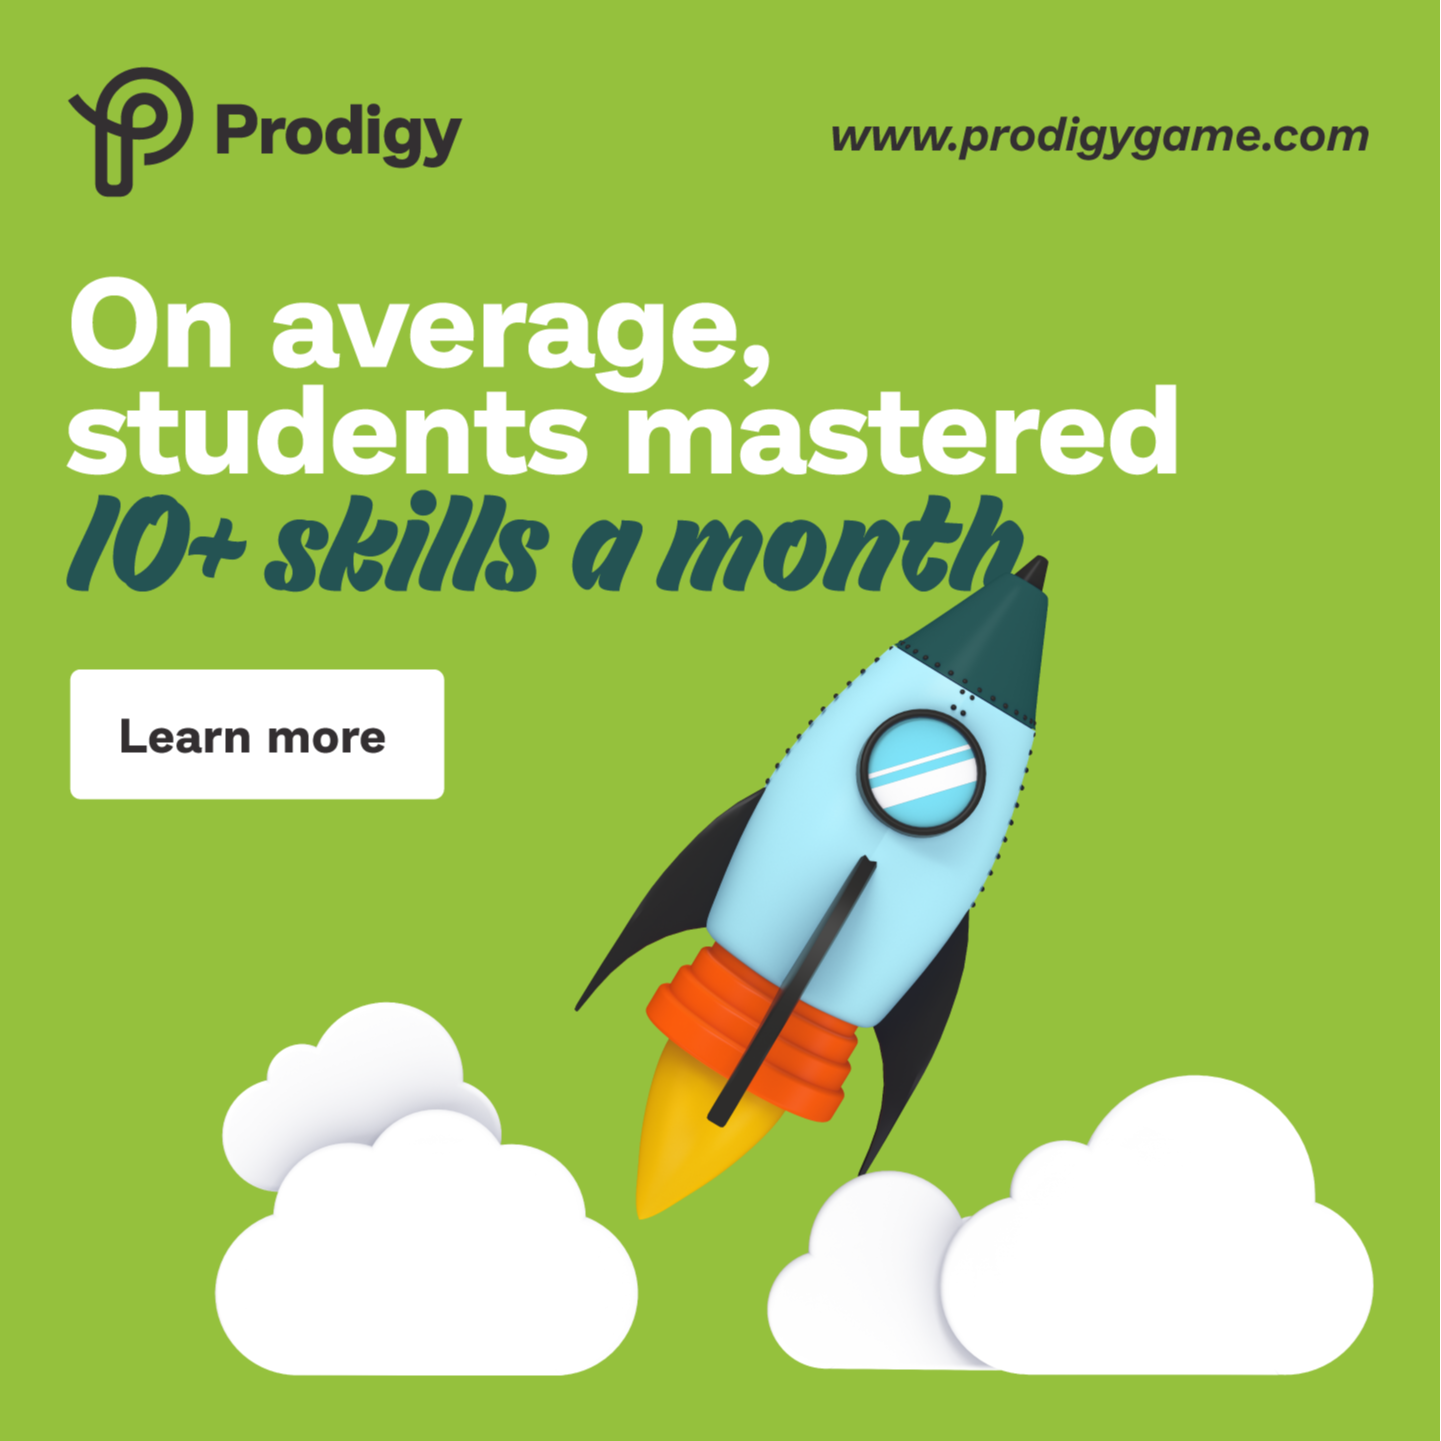 Prodigy Game graphic – "On average students mastered 10+ skills a month"